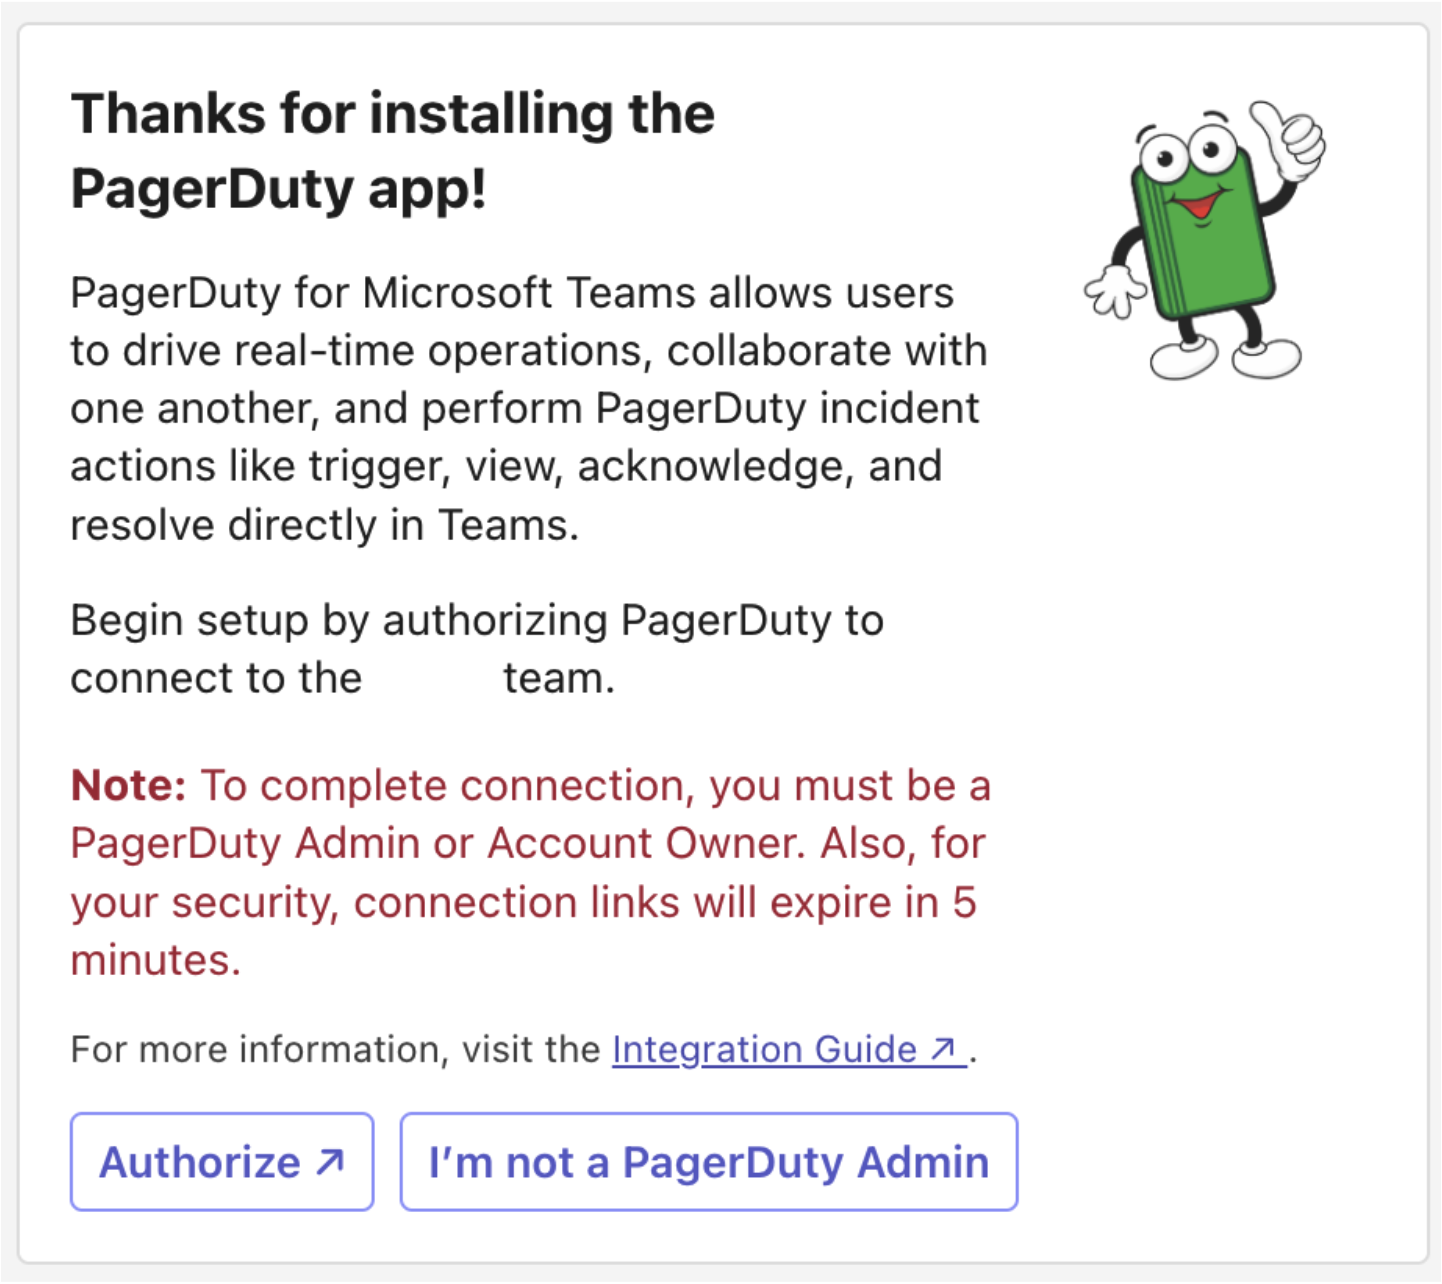 PagerDuty Private Chat Prompt to Authorize the App